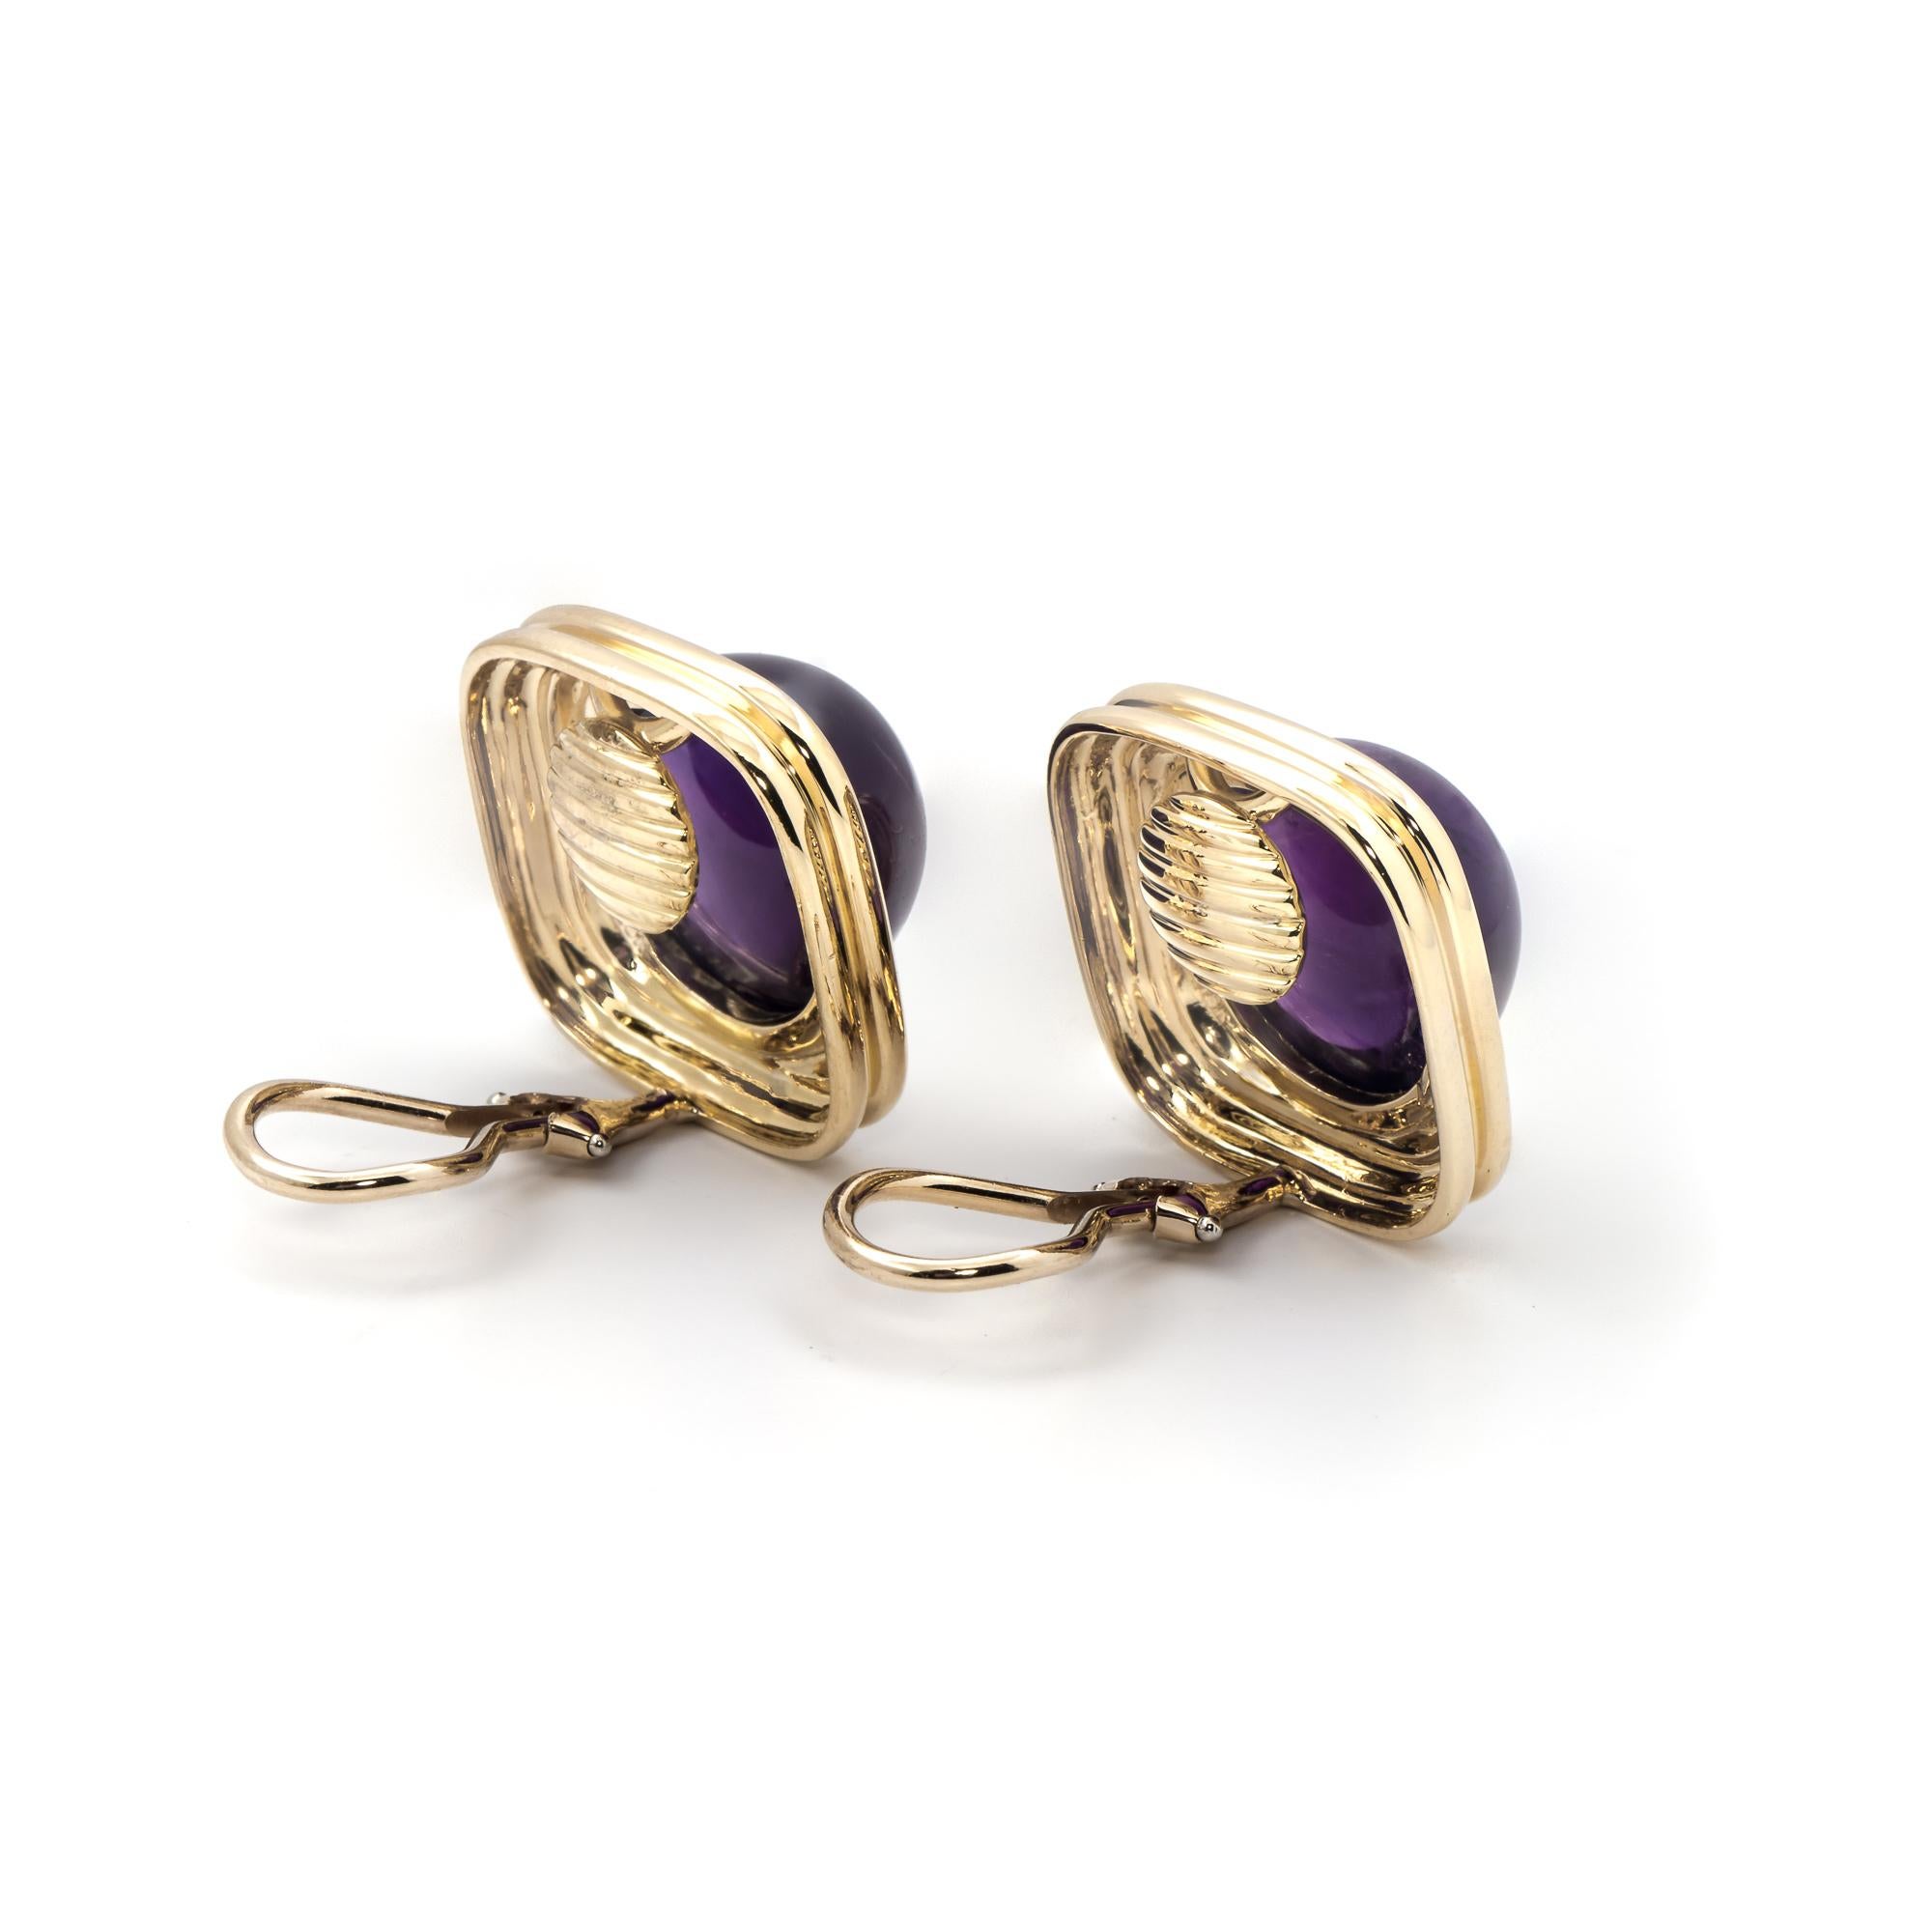 Exclusively from our Estate collection, these 18K yellow gold clip on earrings have two round cabochon cut amethysts at 30.00ctw set in a square frame. With a classic design and a rich hue of purple; these earrings are a wonderful gift for the